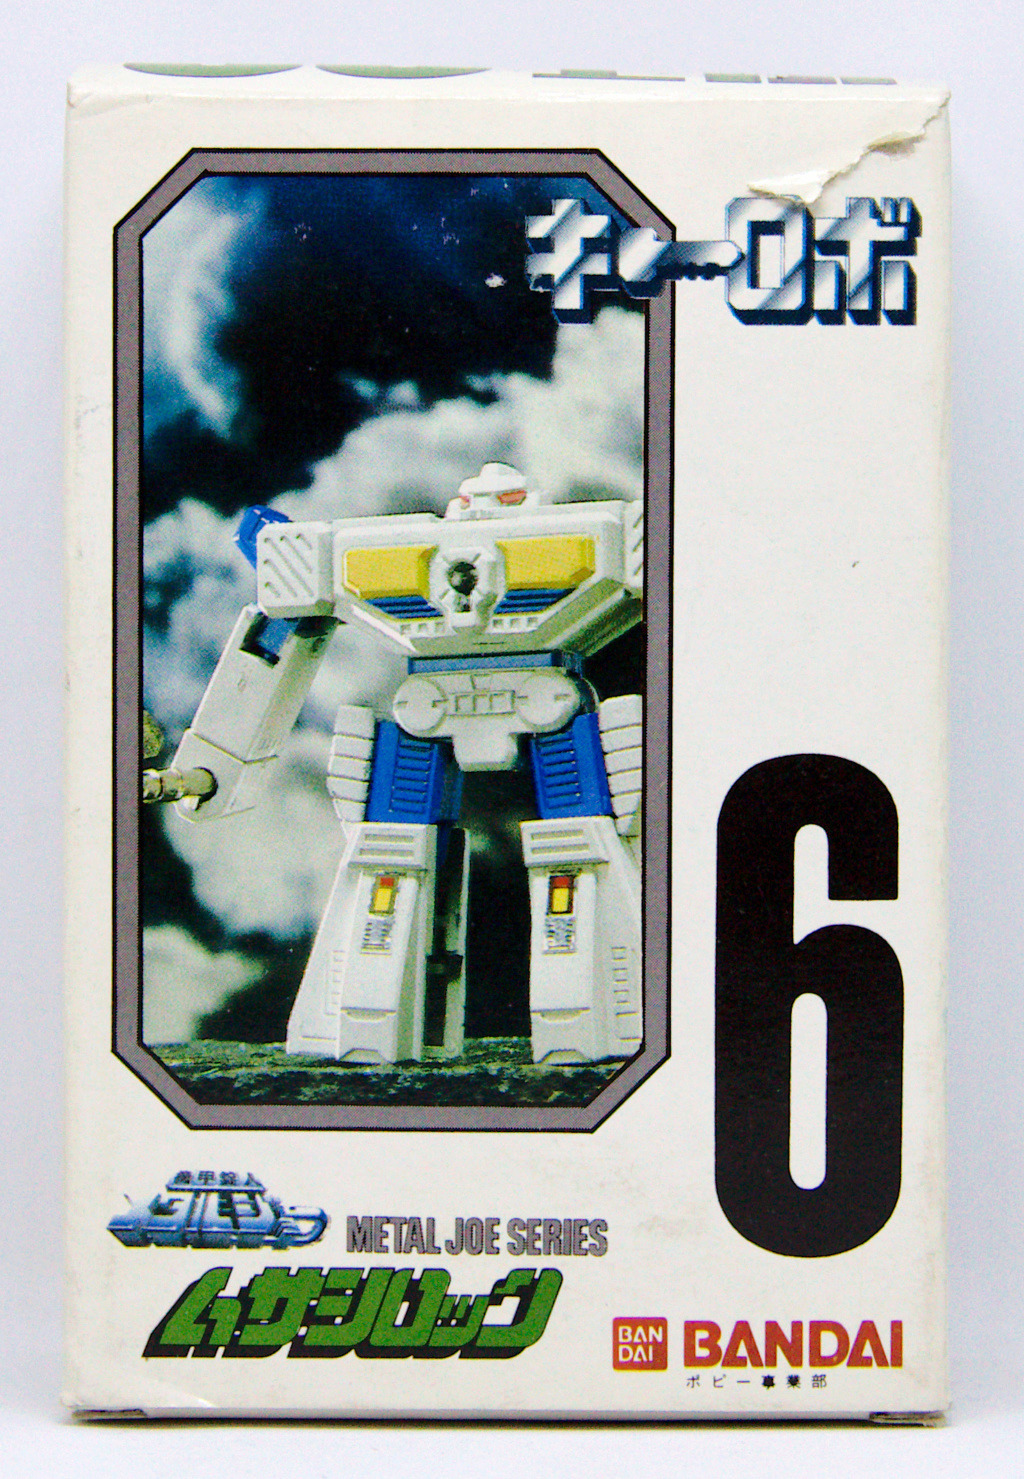 Pilgrim's collection (Gobots, Transformers...) - Page 23 Mj-06_10